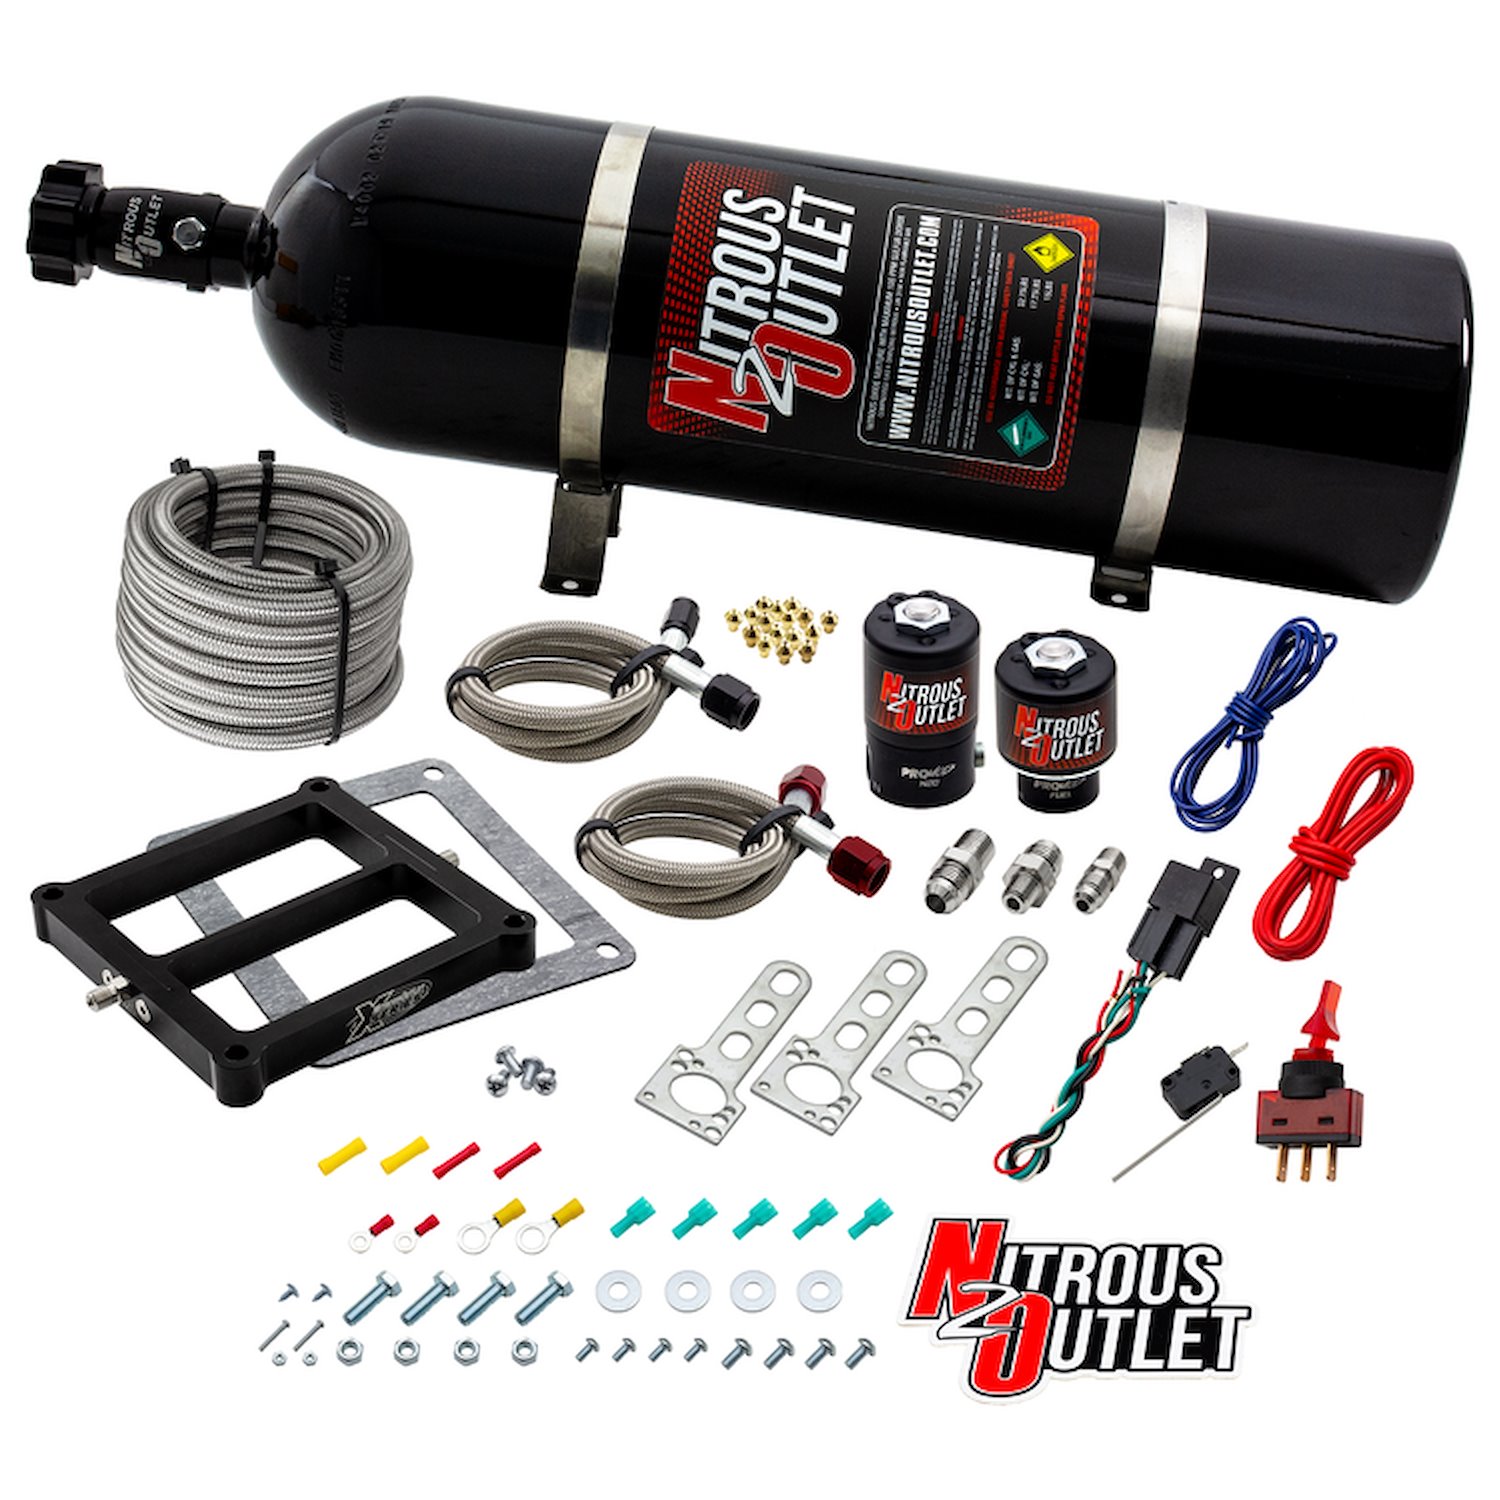 00-10071-15 Weekend Warrior 4500 Plate System, Gas/E85, 5-55psi, 100-350 HP, 15LB Bottle